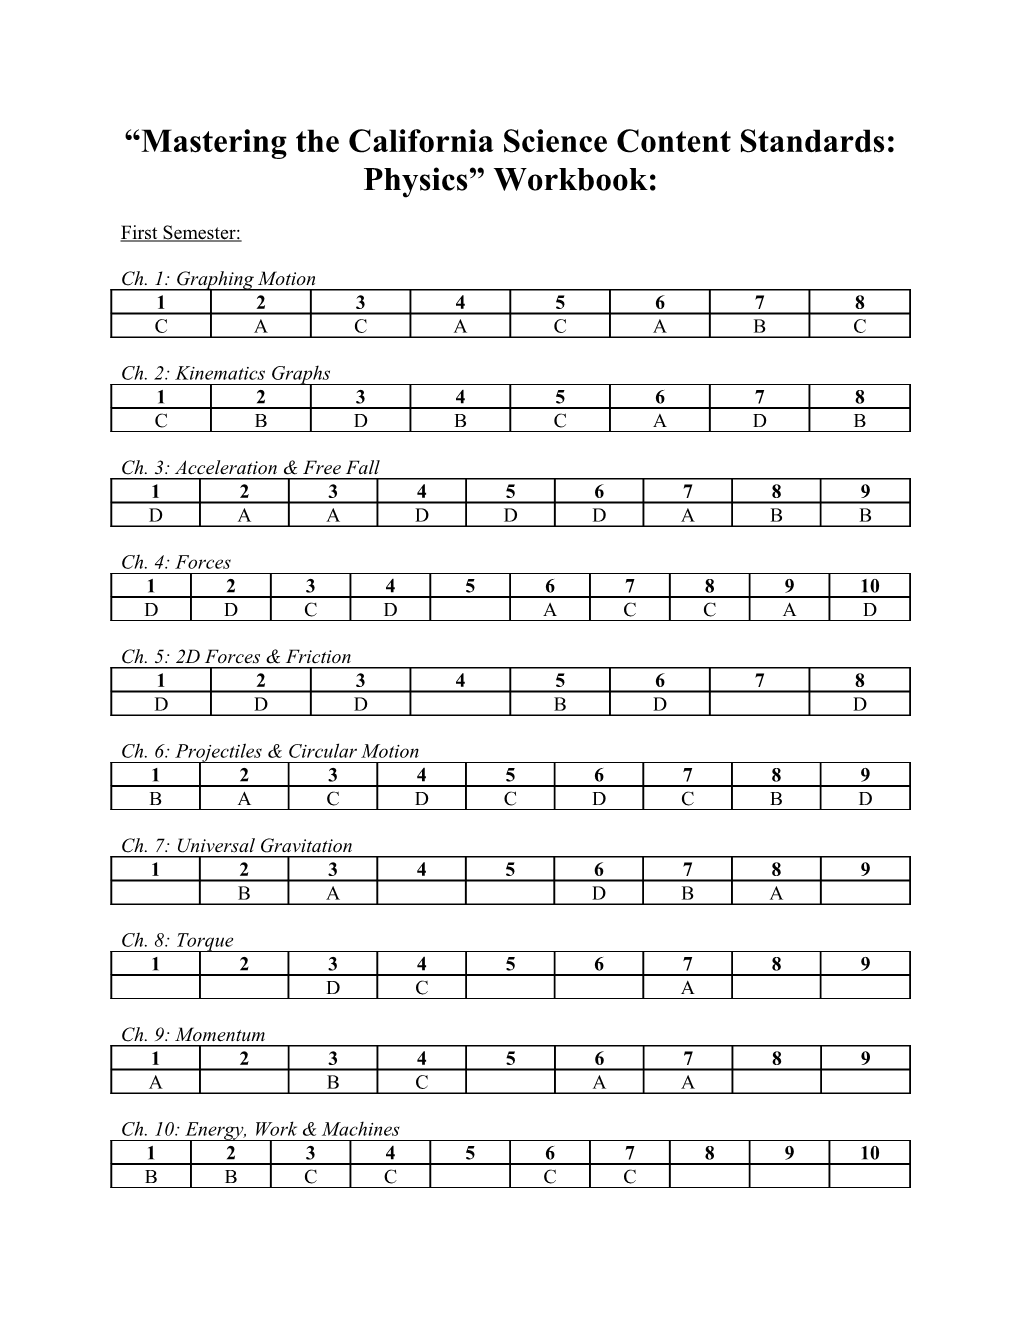 Mastering the California Science Content Standards: Physics Workbook